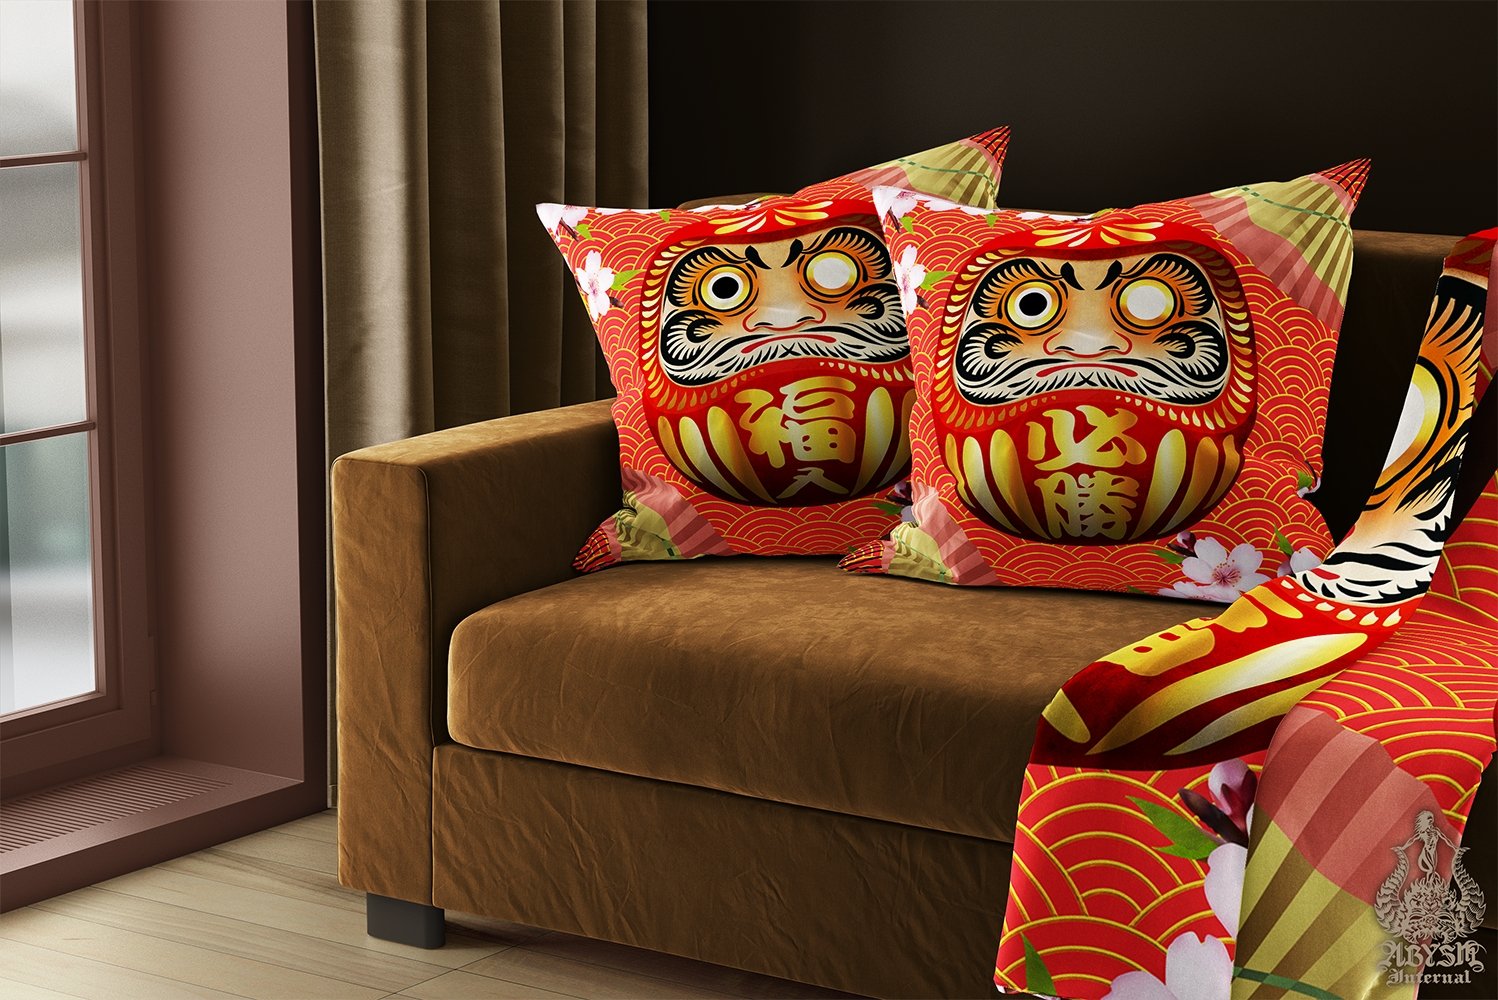 Daruma Throw Pillow, Decorative Accent Cushion, Japanese Room Decor, Funky and Eclectic Home - Red - Abysm Internal